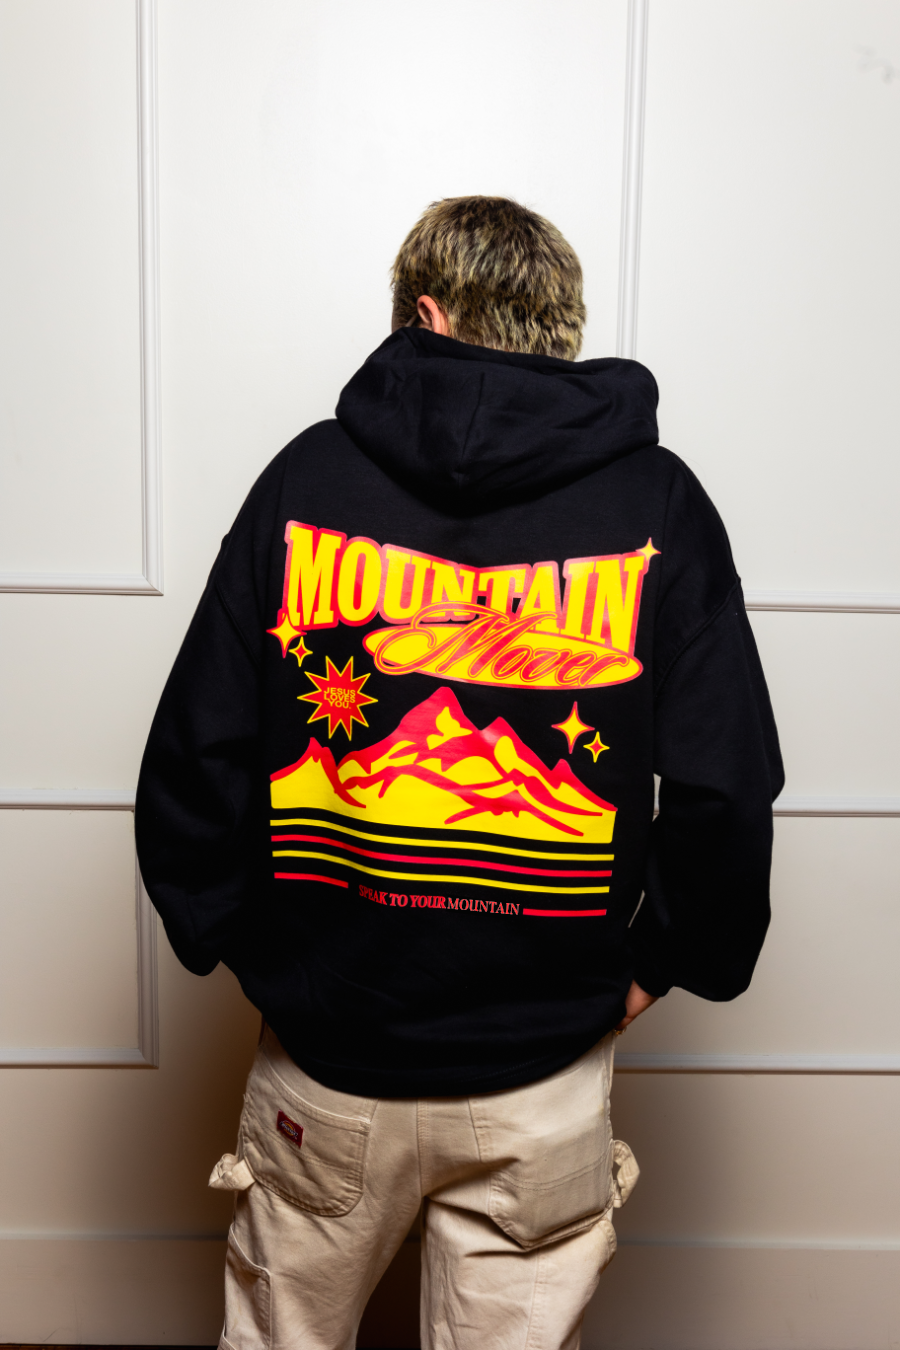 Mountain Mover V2 Hoodie